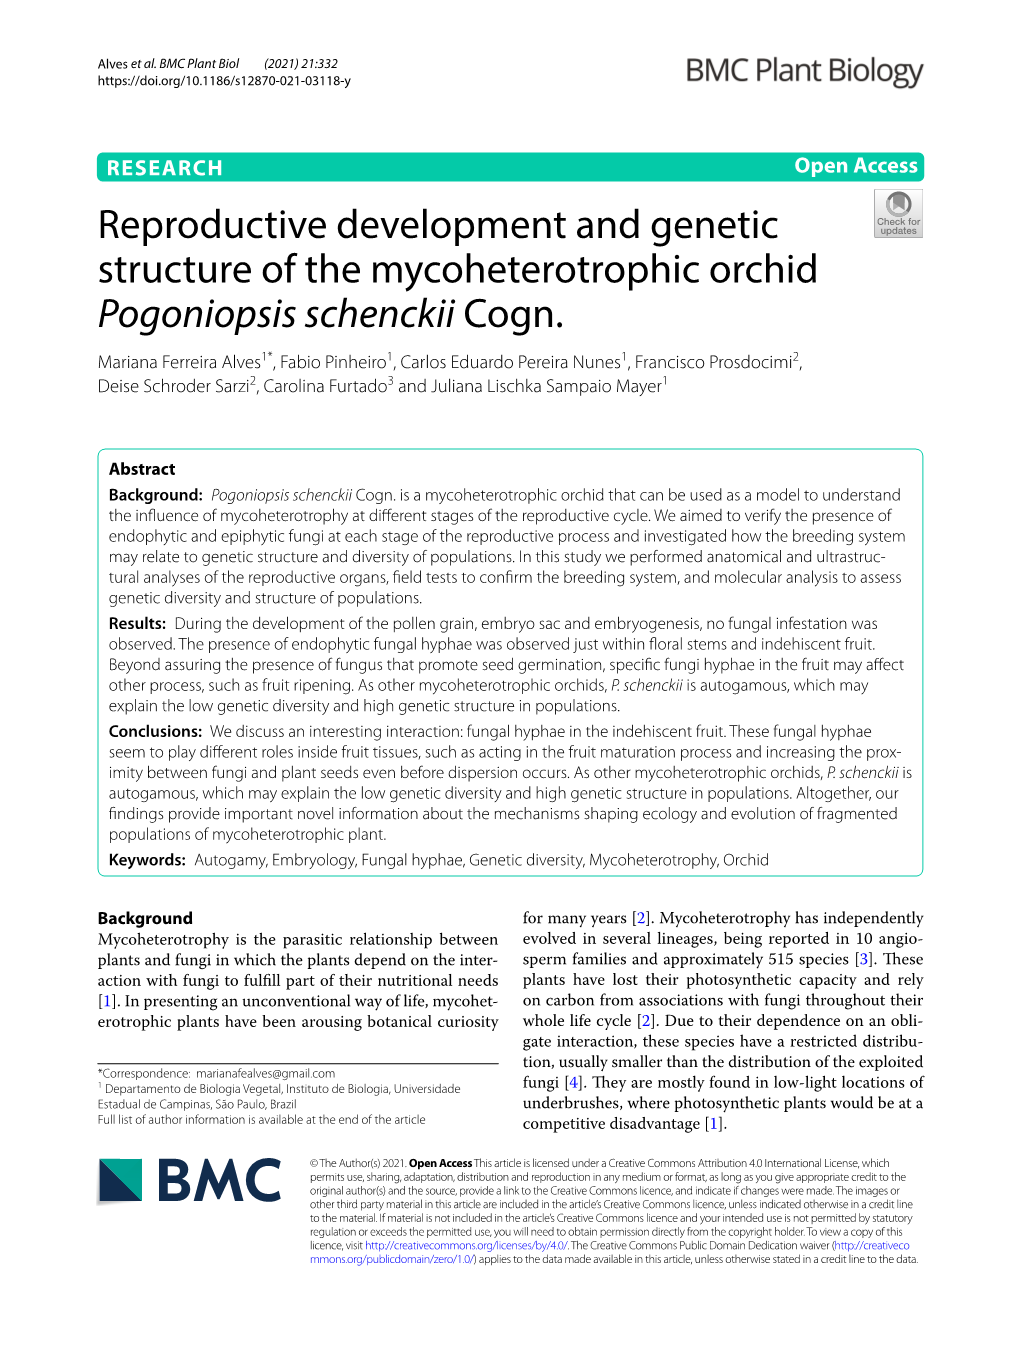 Reproductive Development and Genetic Structure of the Mycoheterotrophic Orchid Pogoniopsis Schenckii Cogn